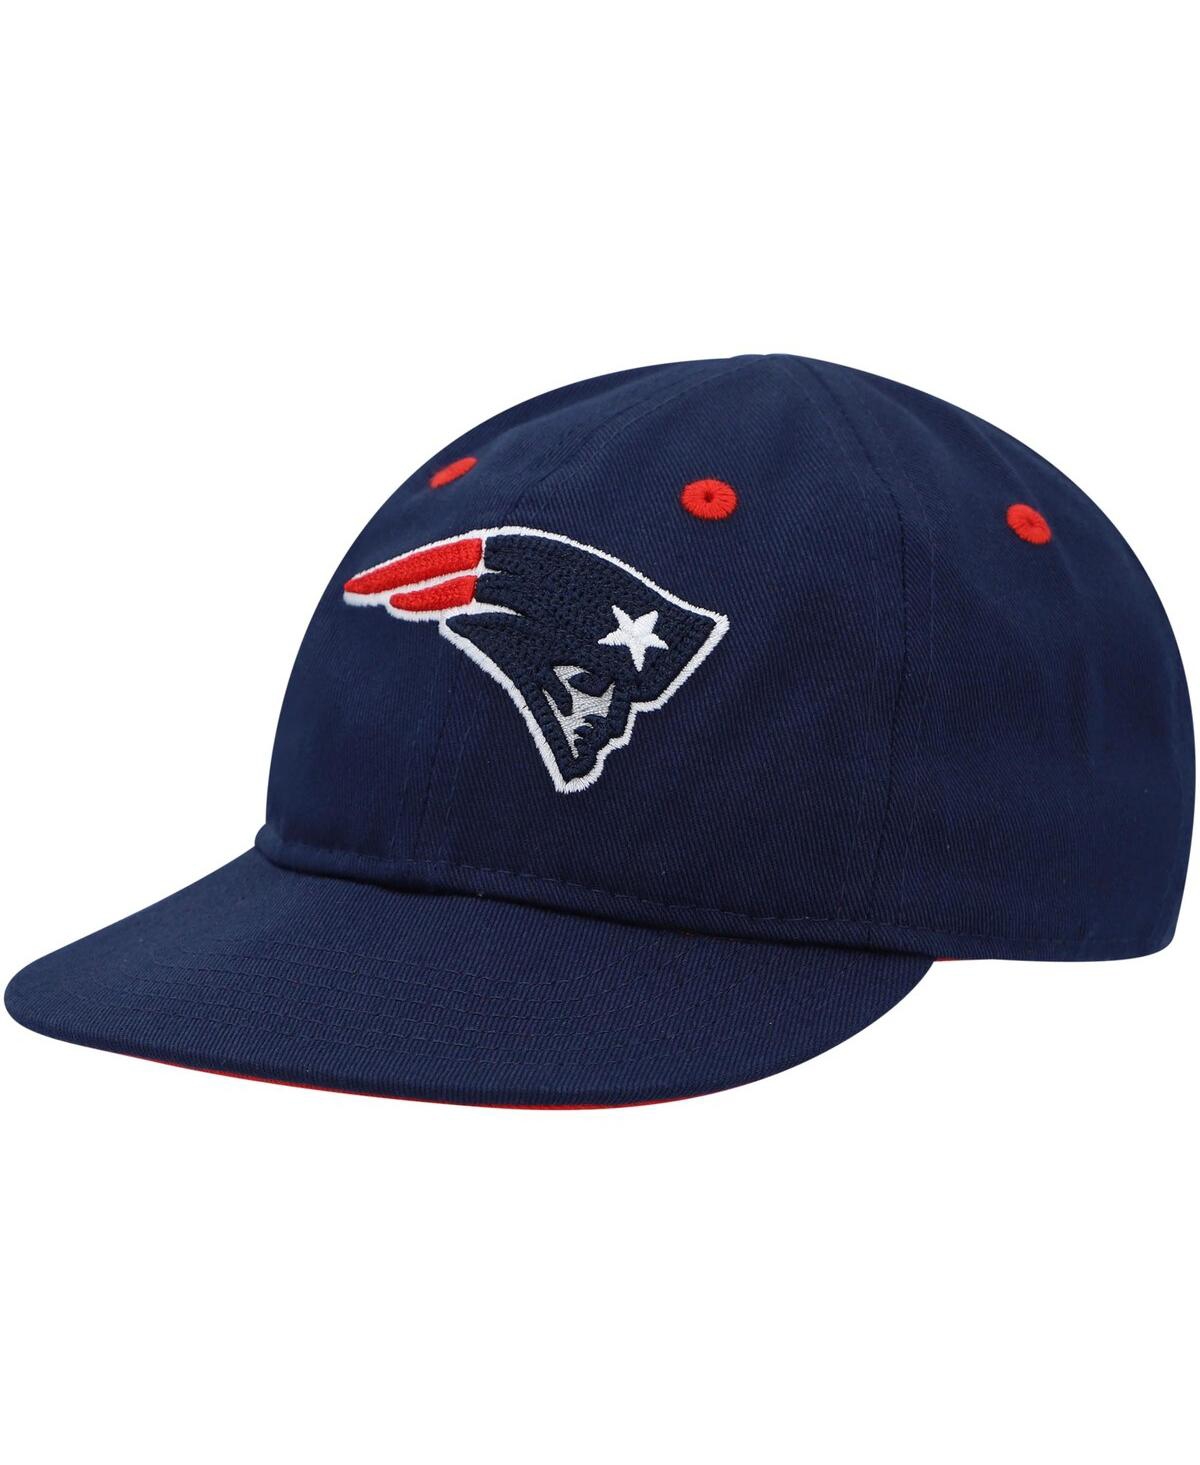 Outerstuff Babies' Infant Boys And Girls Navy New England Patriots Team Slouch Flex Hat